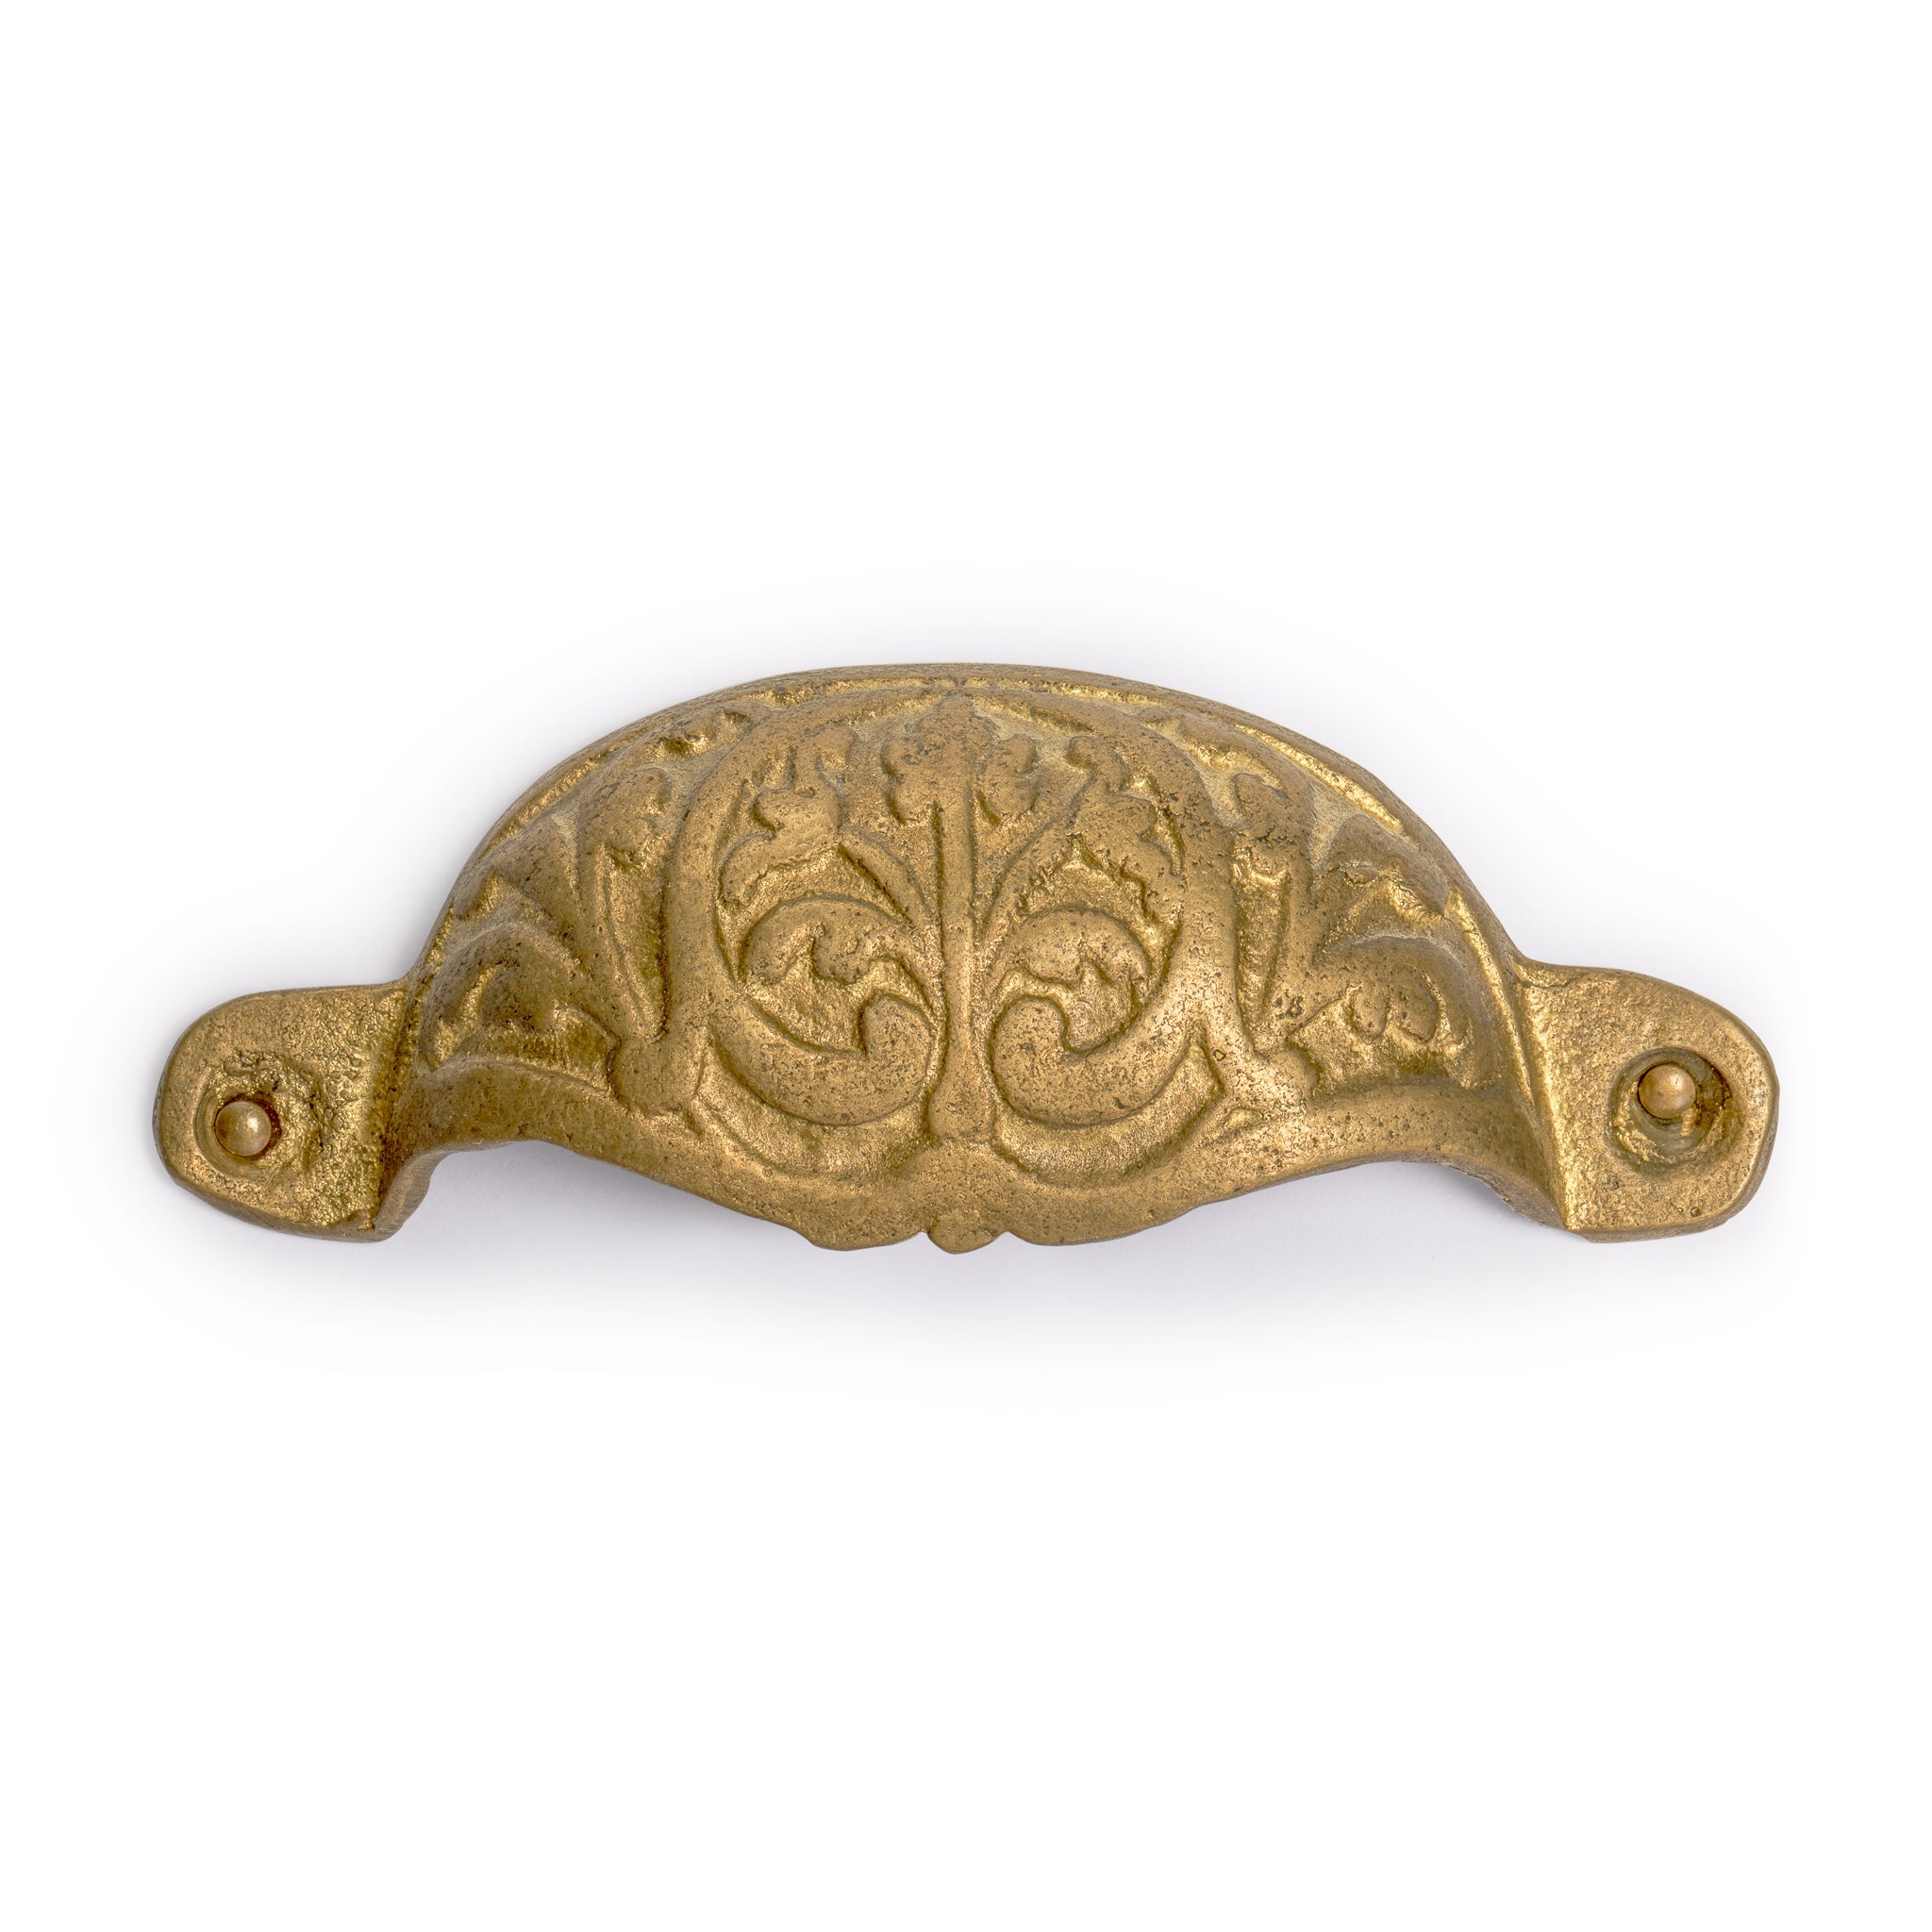 Bamboo Leaf Handle Pulls 3.5" - Set of 2-Chinese Brass Hardware